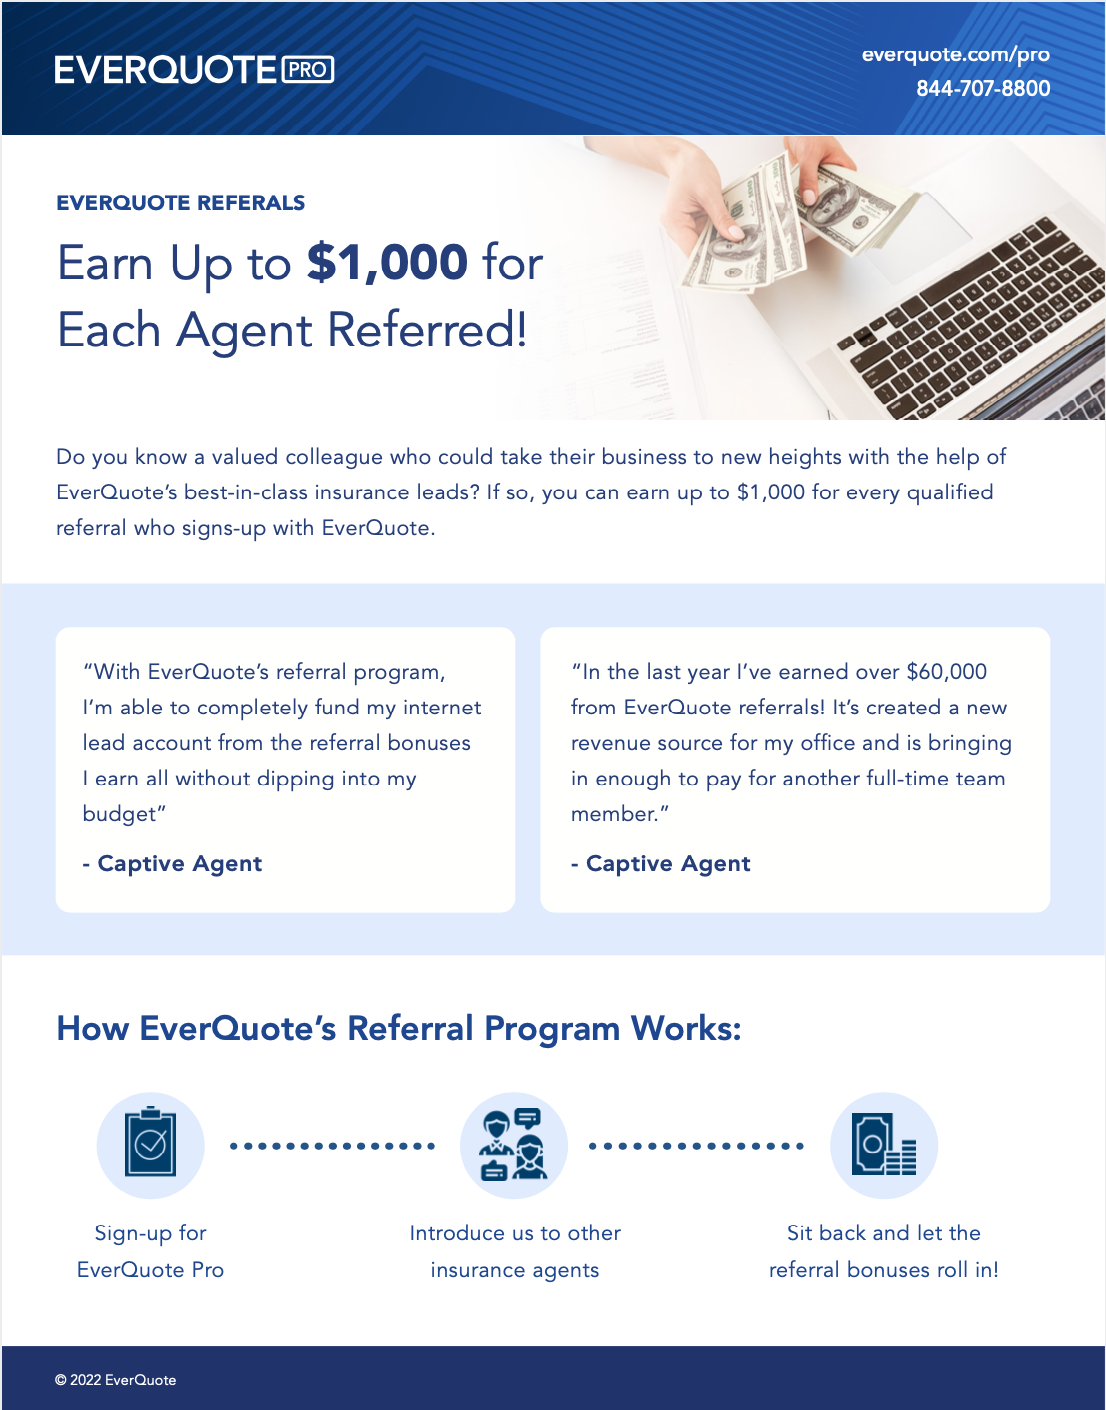 EverQuote's Referral Program: Earn Up to $1,000 for Every Agent Referred!